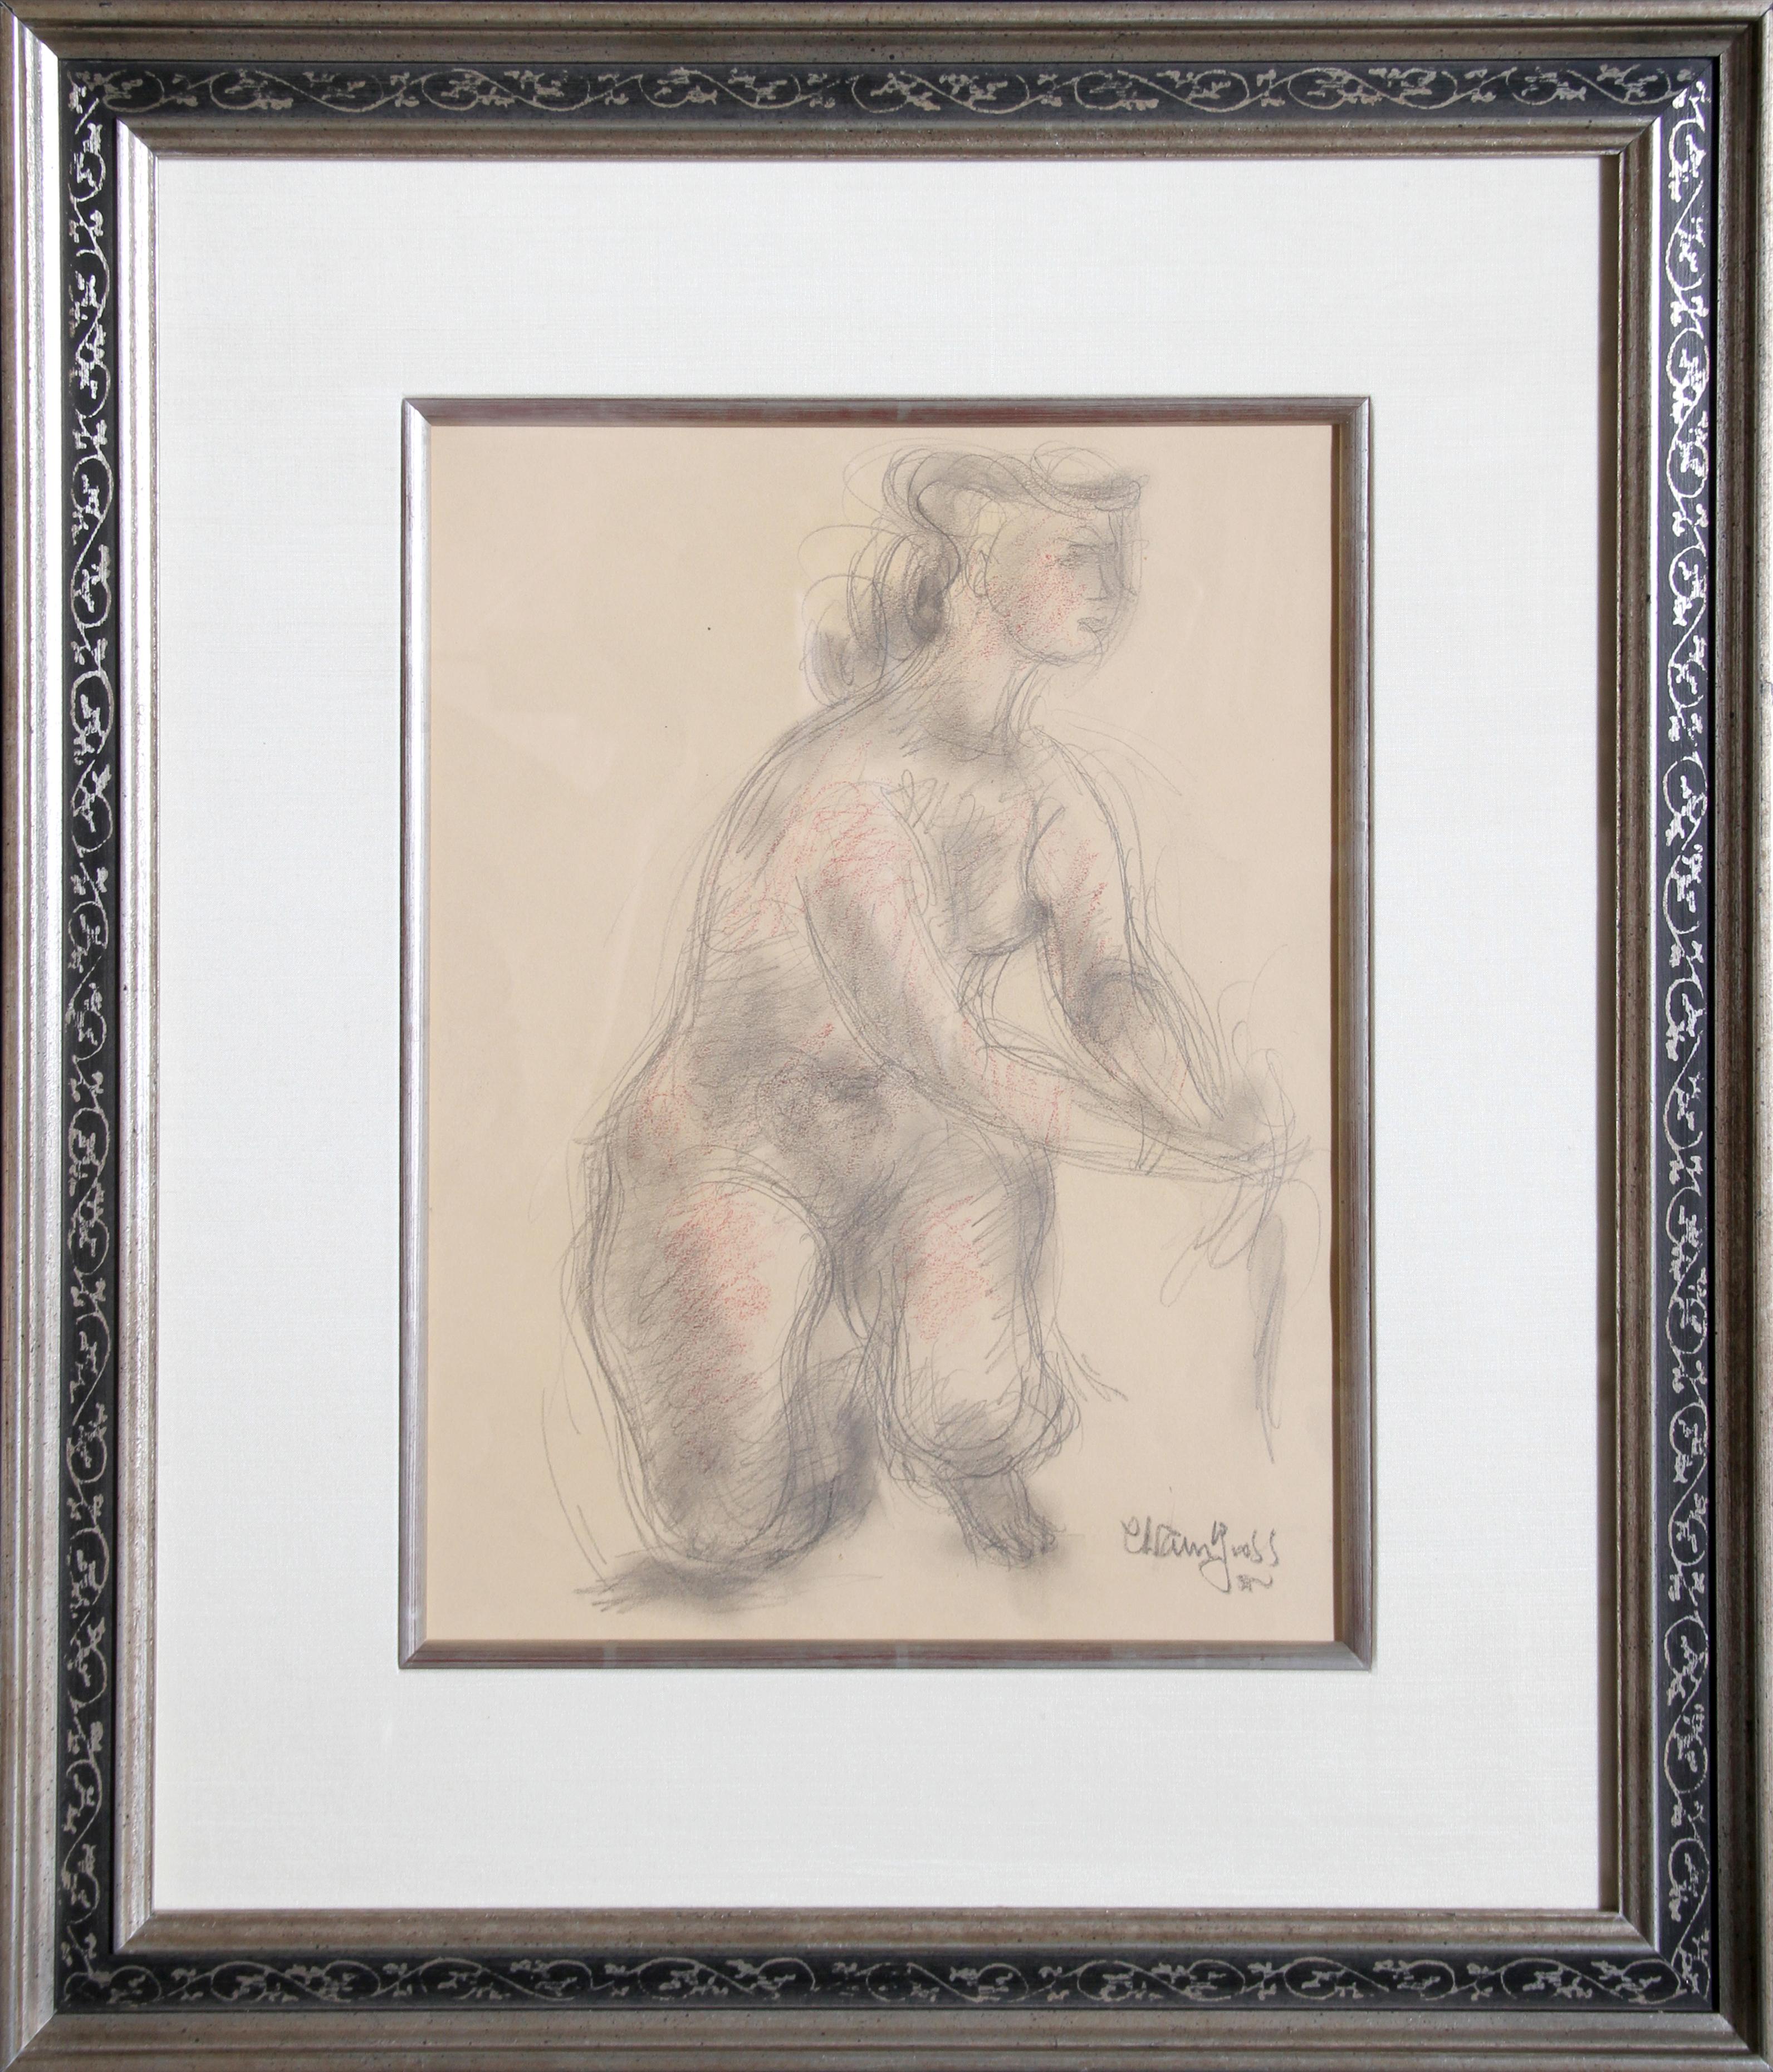 Artist: Chaim Gross, Austrian (1904 - 1991)
Title: Nude Woman
Year: circa 1930
Medium: Graphite and Color Pencil on Paper, signed
Size: 15 in. x 11 in. (38.1 cm x 27.94 cm)
Frame Size: 24 x 20 inches